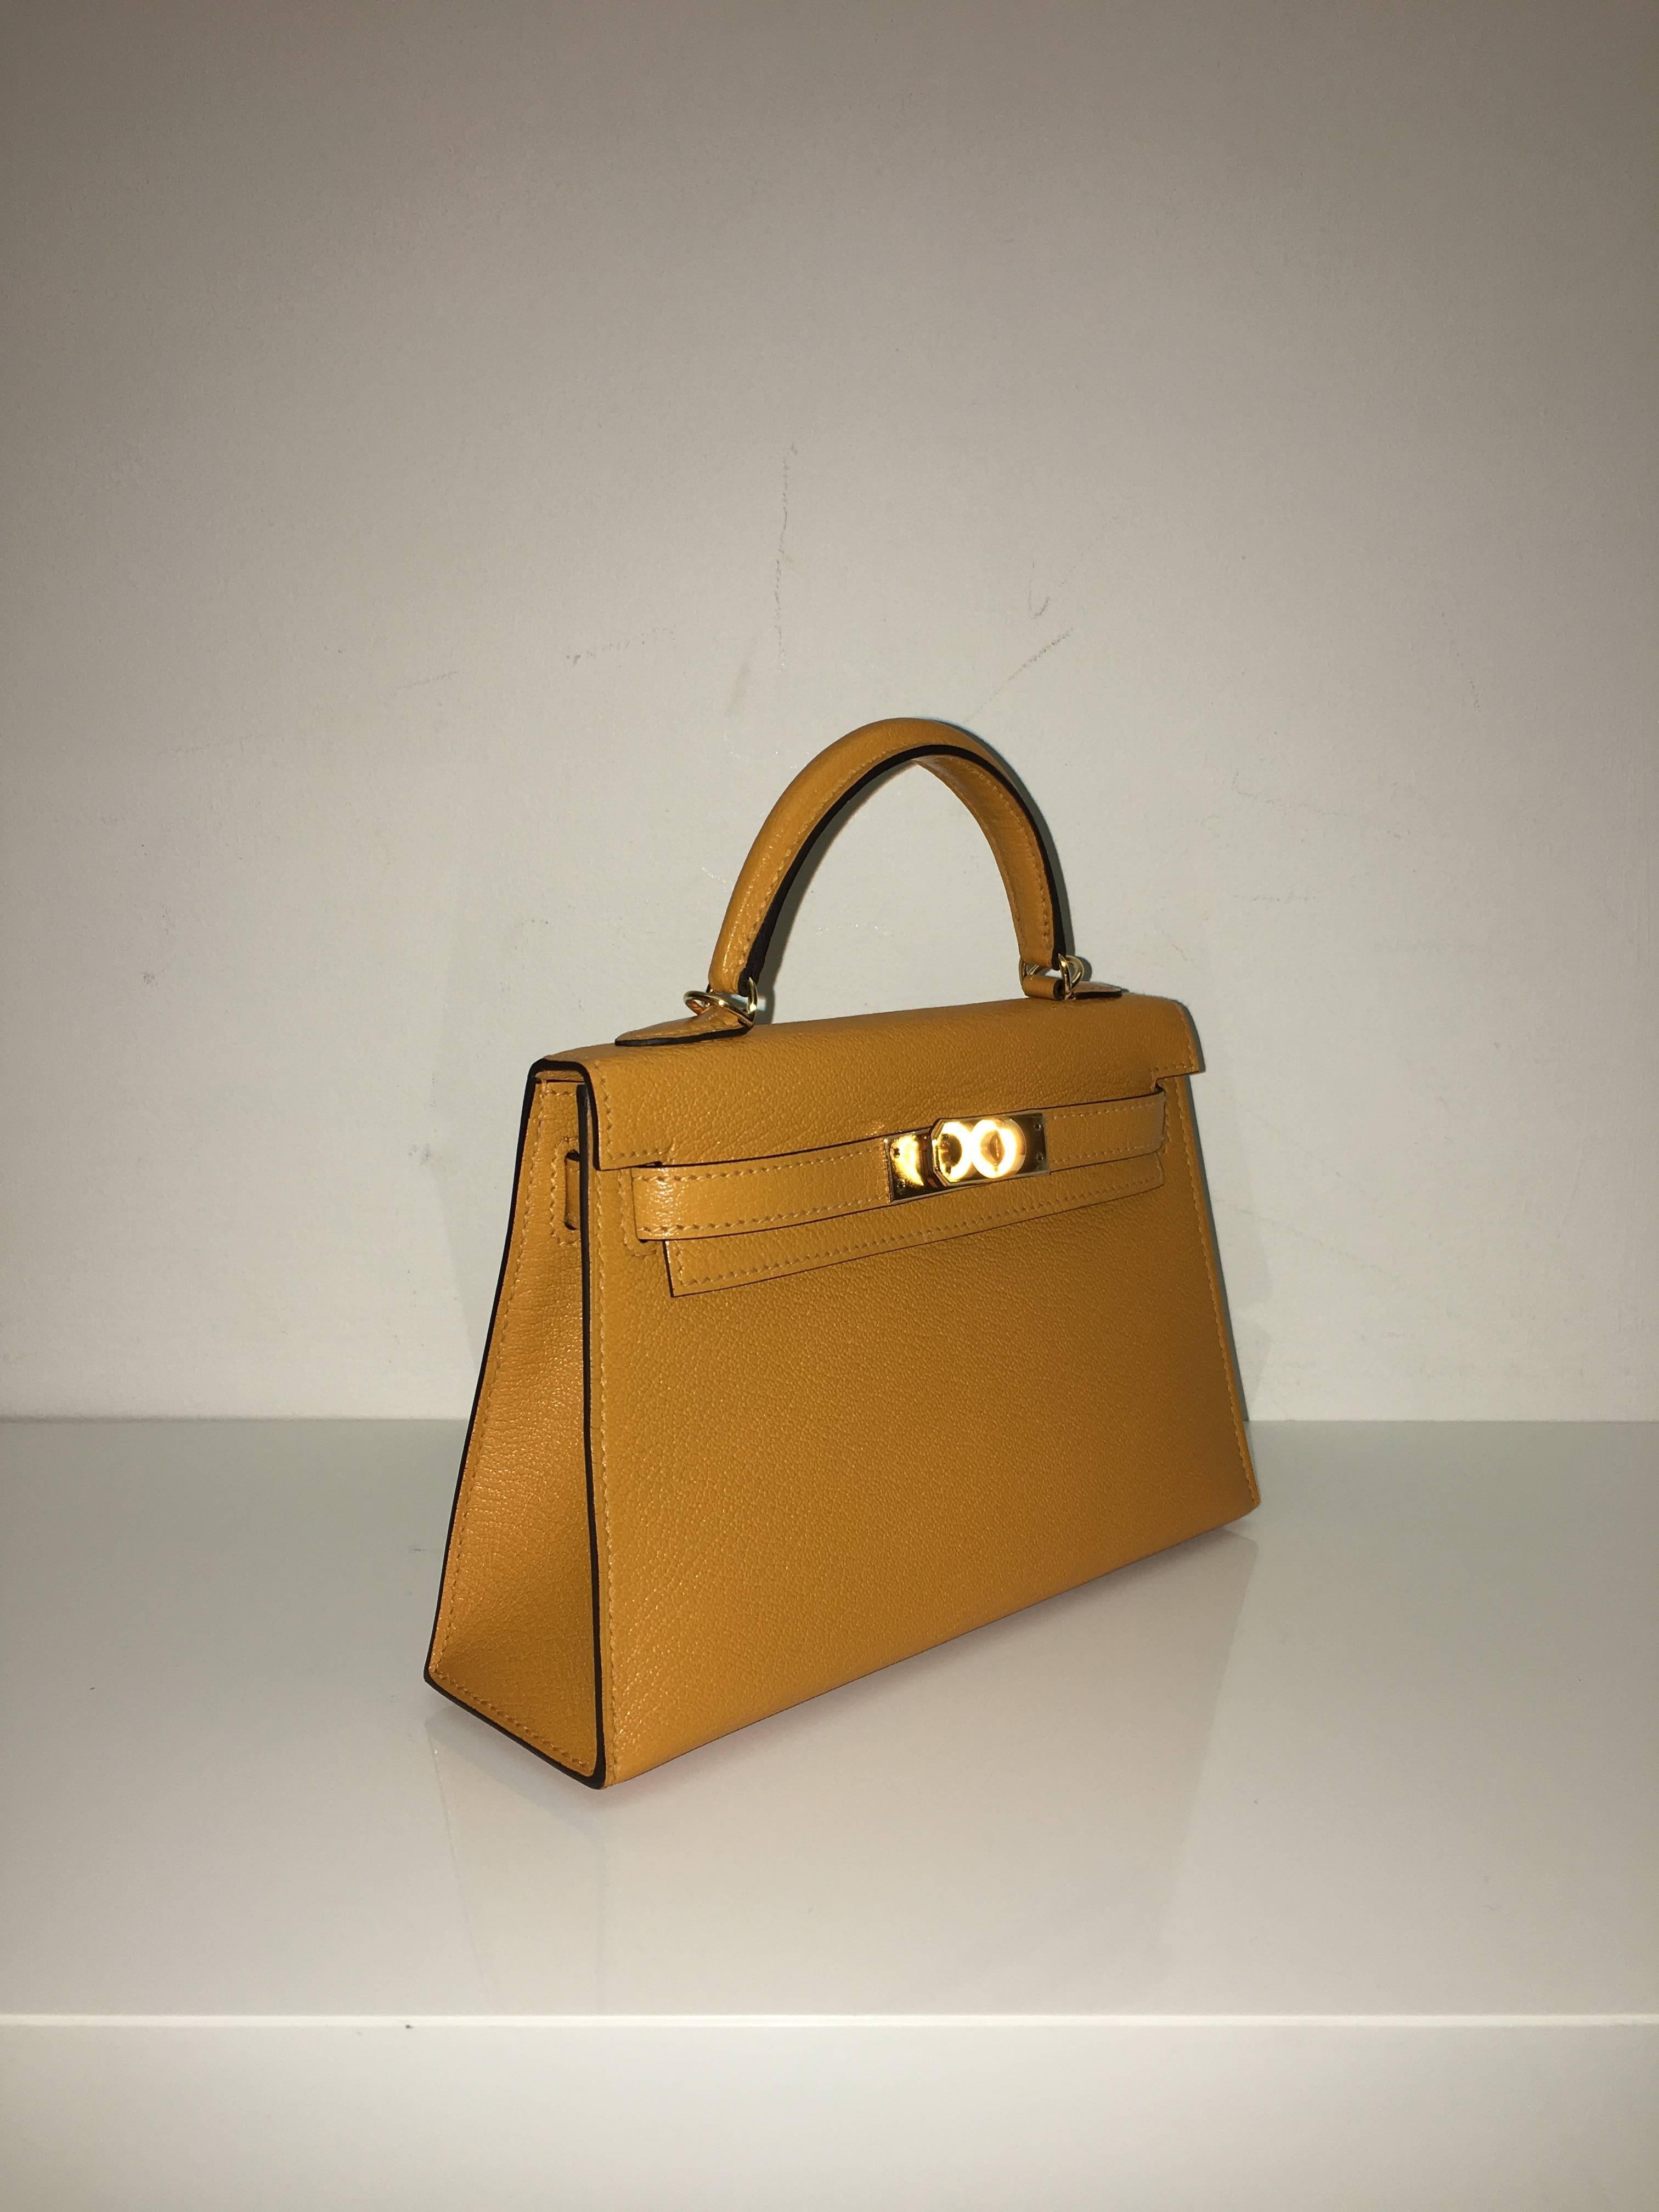 Hermes 
Kelly Size 20
Chevre Leather 
Colour Mustard
Gold Hardware 
store fresh, comes with receipt and full set (dust bag, box...) 
Hydeparkfashion specializes in sourcing and delivering authentic luxury handbags, mainly Hermes, to client